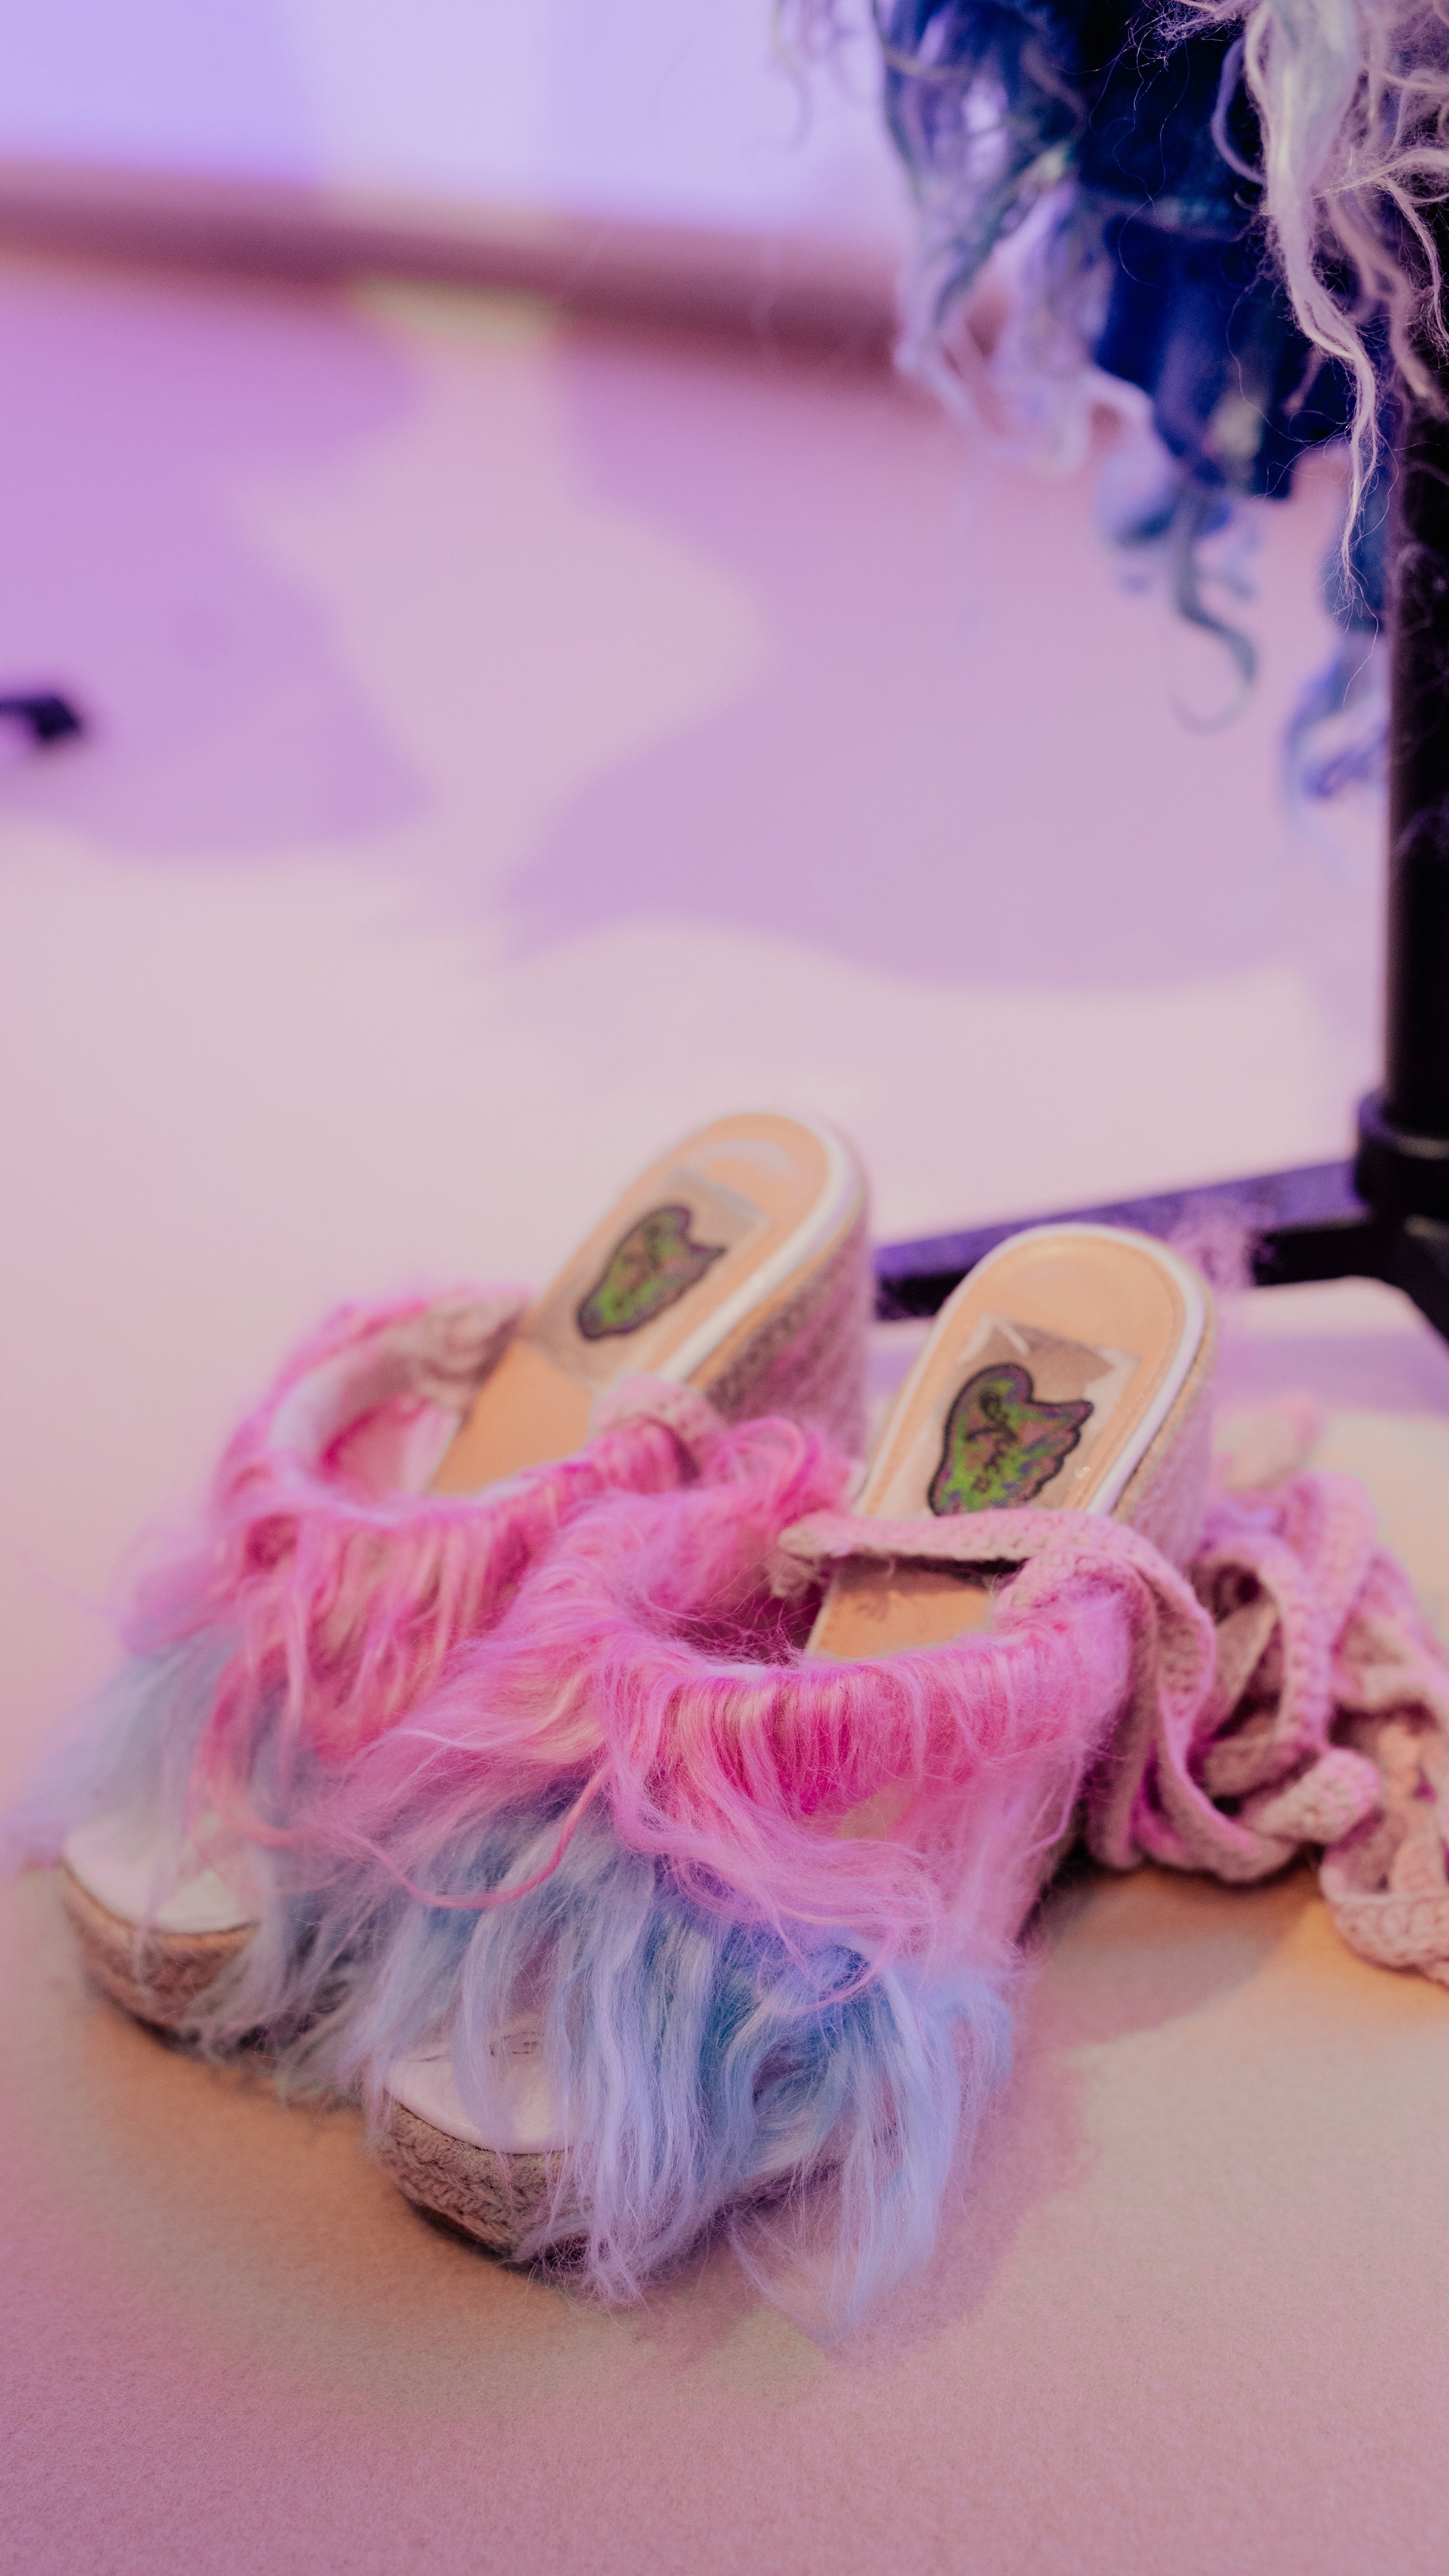 Look 1, LA ZARZAMORA wedges from REGENERATIVE FOLKLORE: Pink and purple fur implanted open-toe wedges with pink crochet straps, showcased at LVMH’s LIFE 360 Summit at UNESCO.